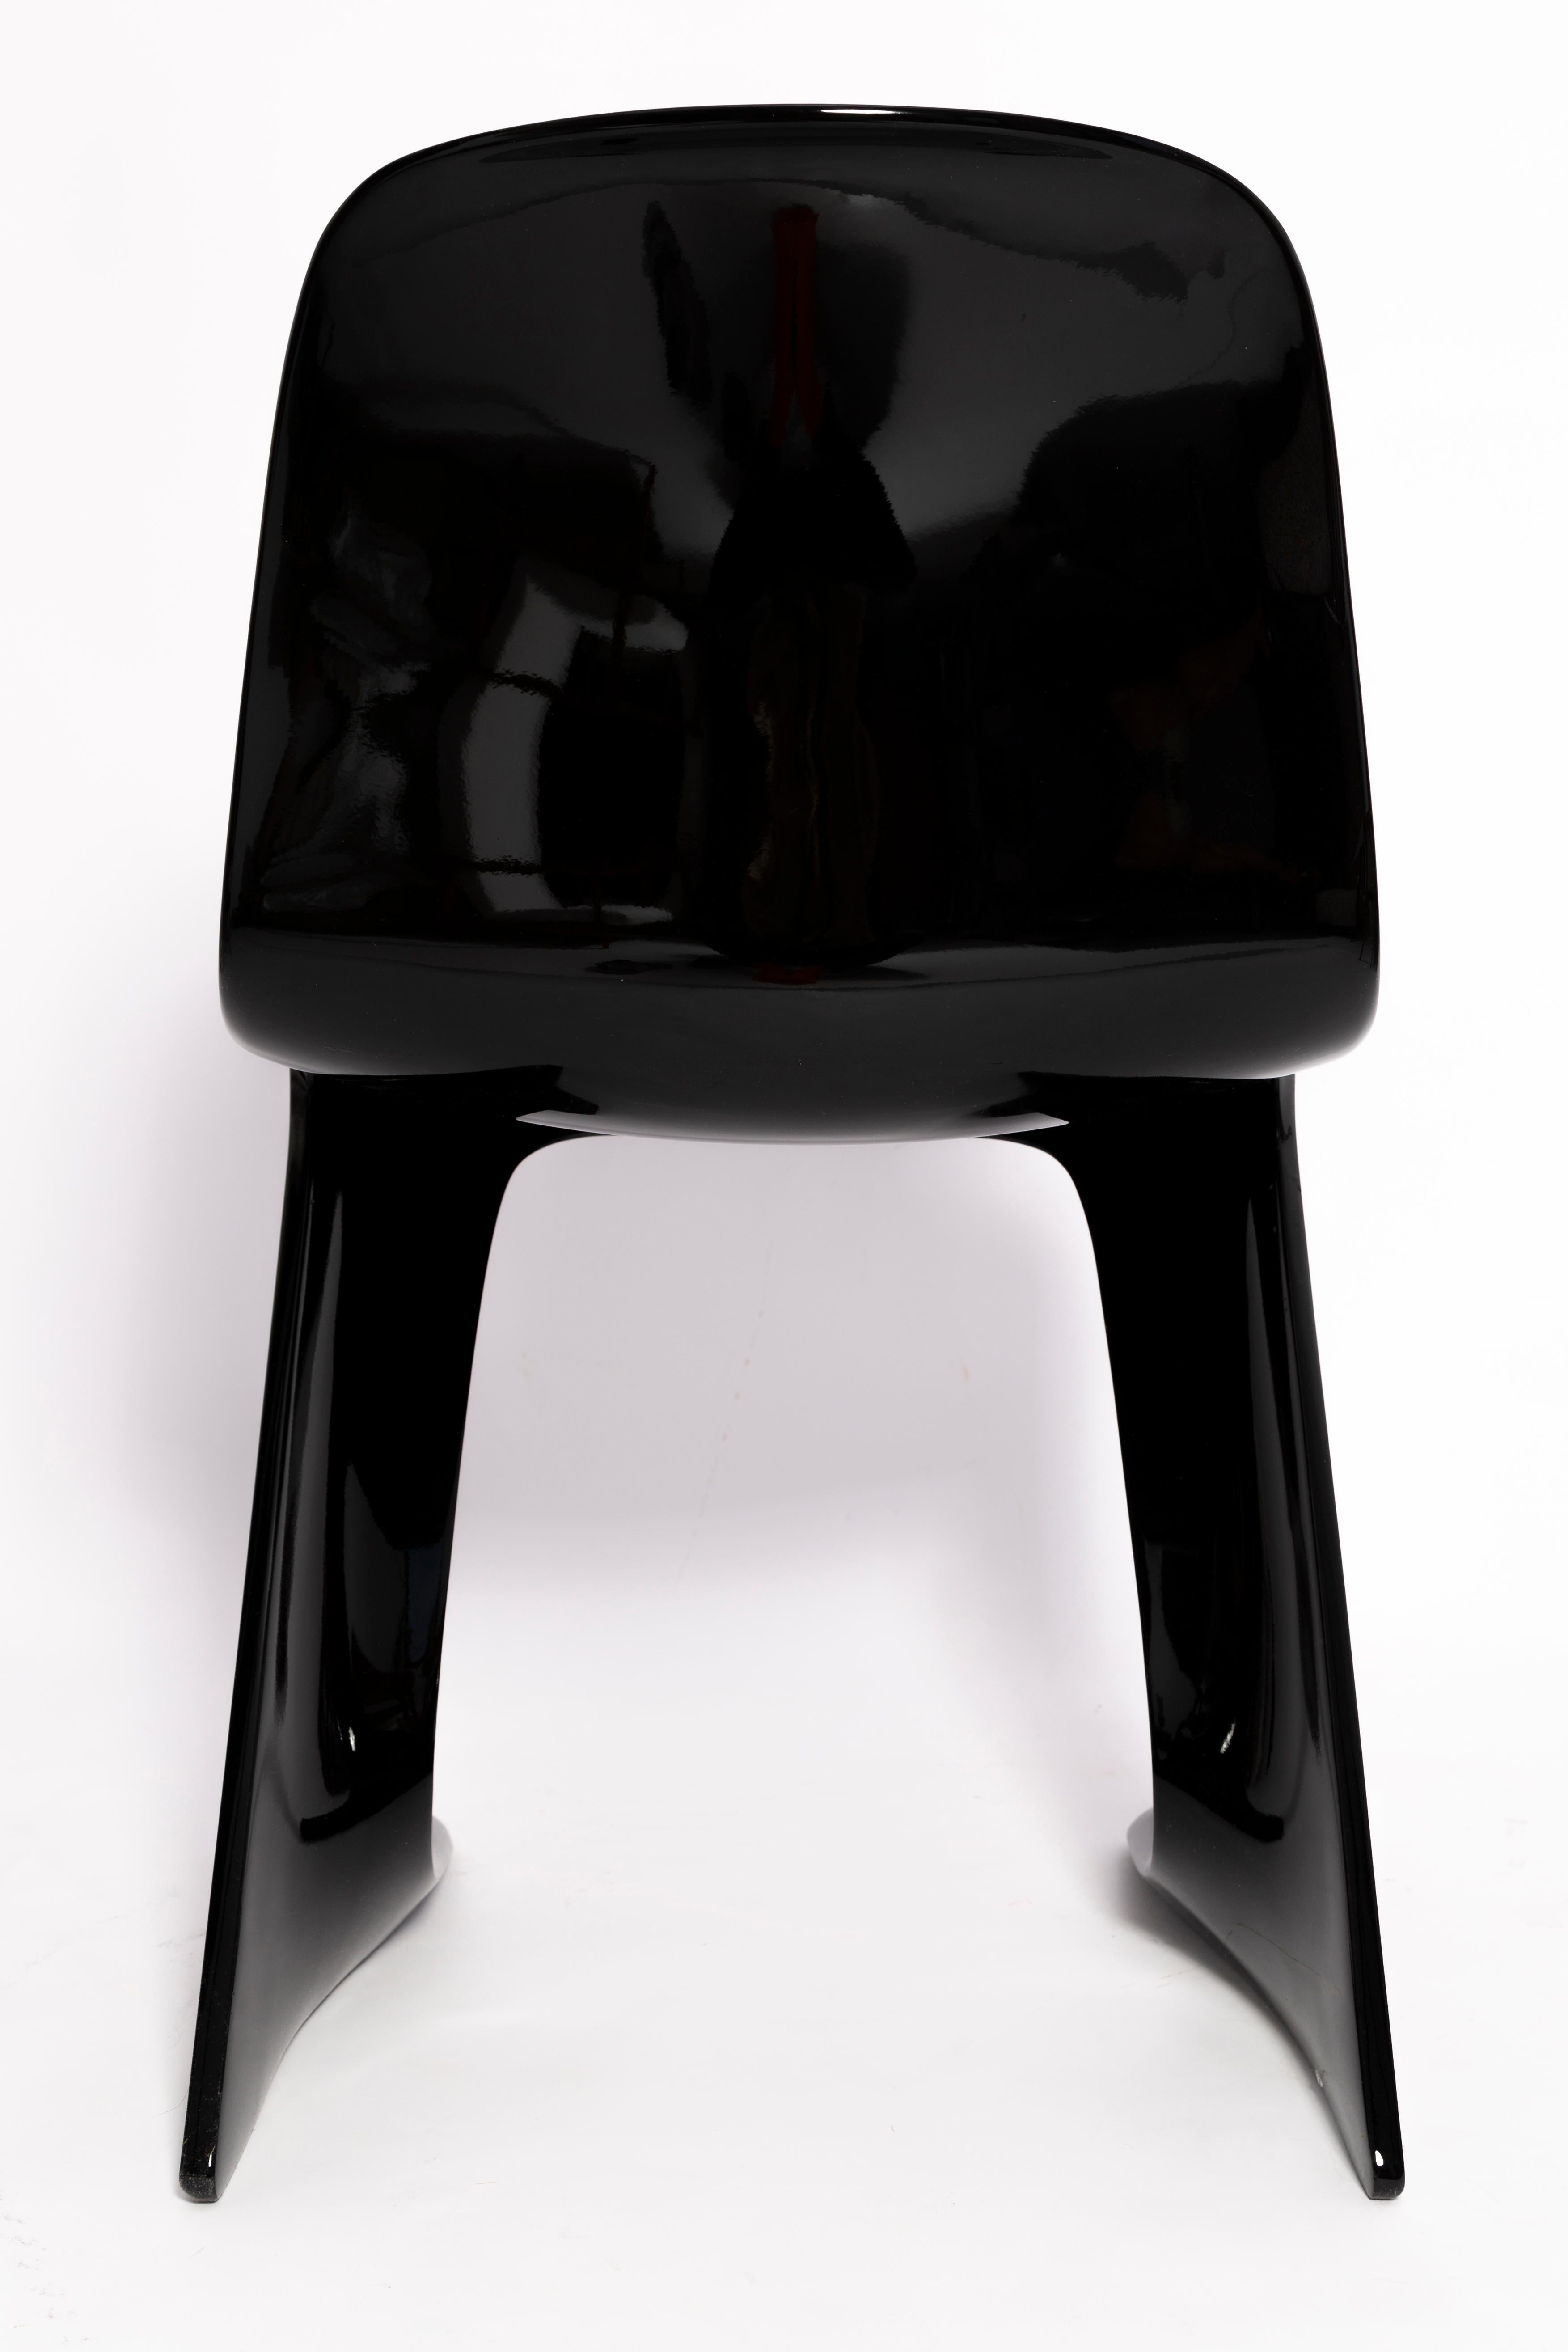 Mid Century Black Glossy Kangaroo Chair Designed by Ernst Moeckl, Germany, 1960s For Sale 1